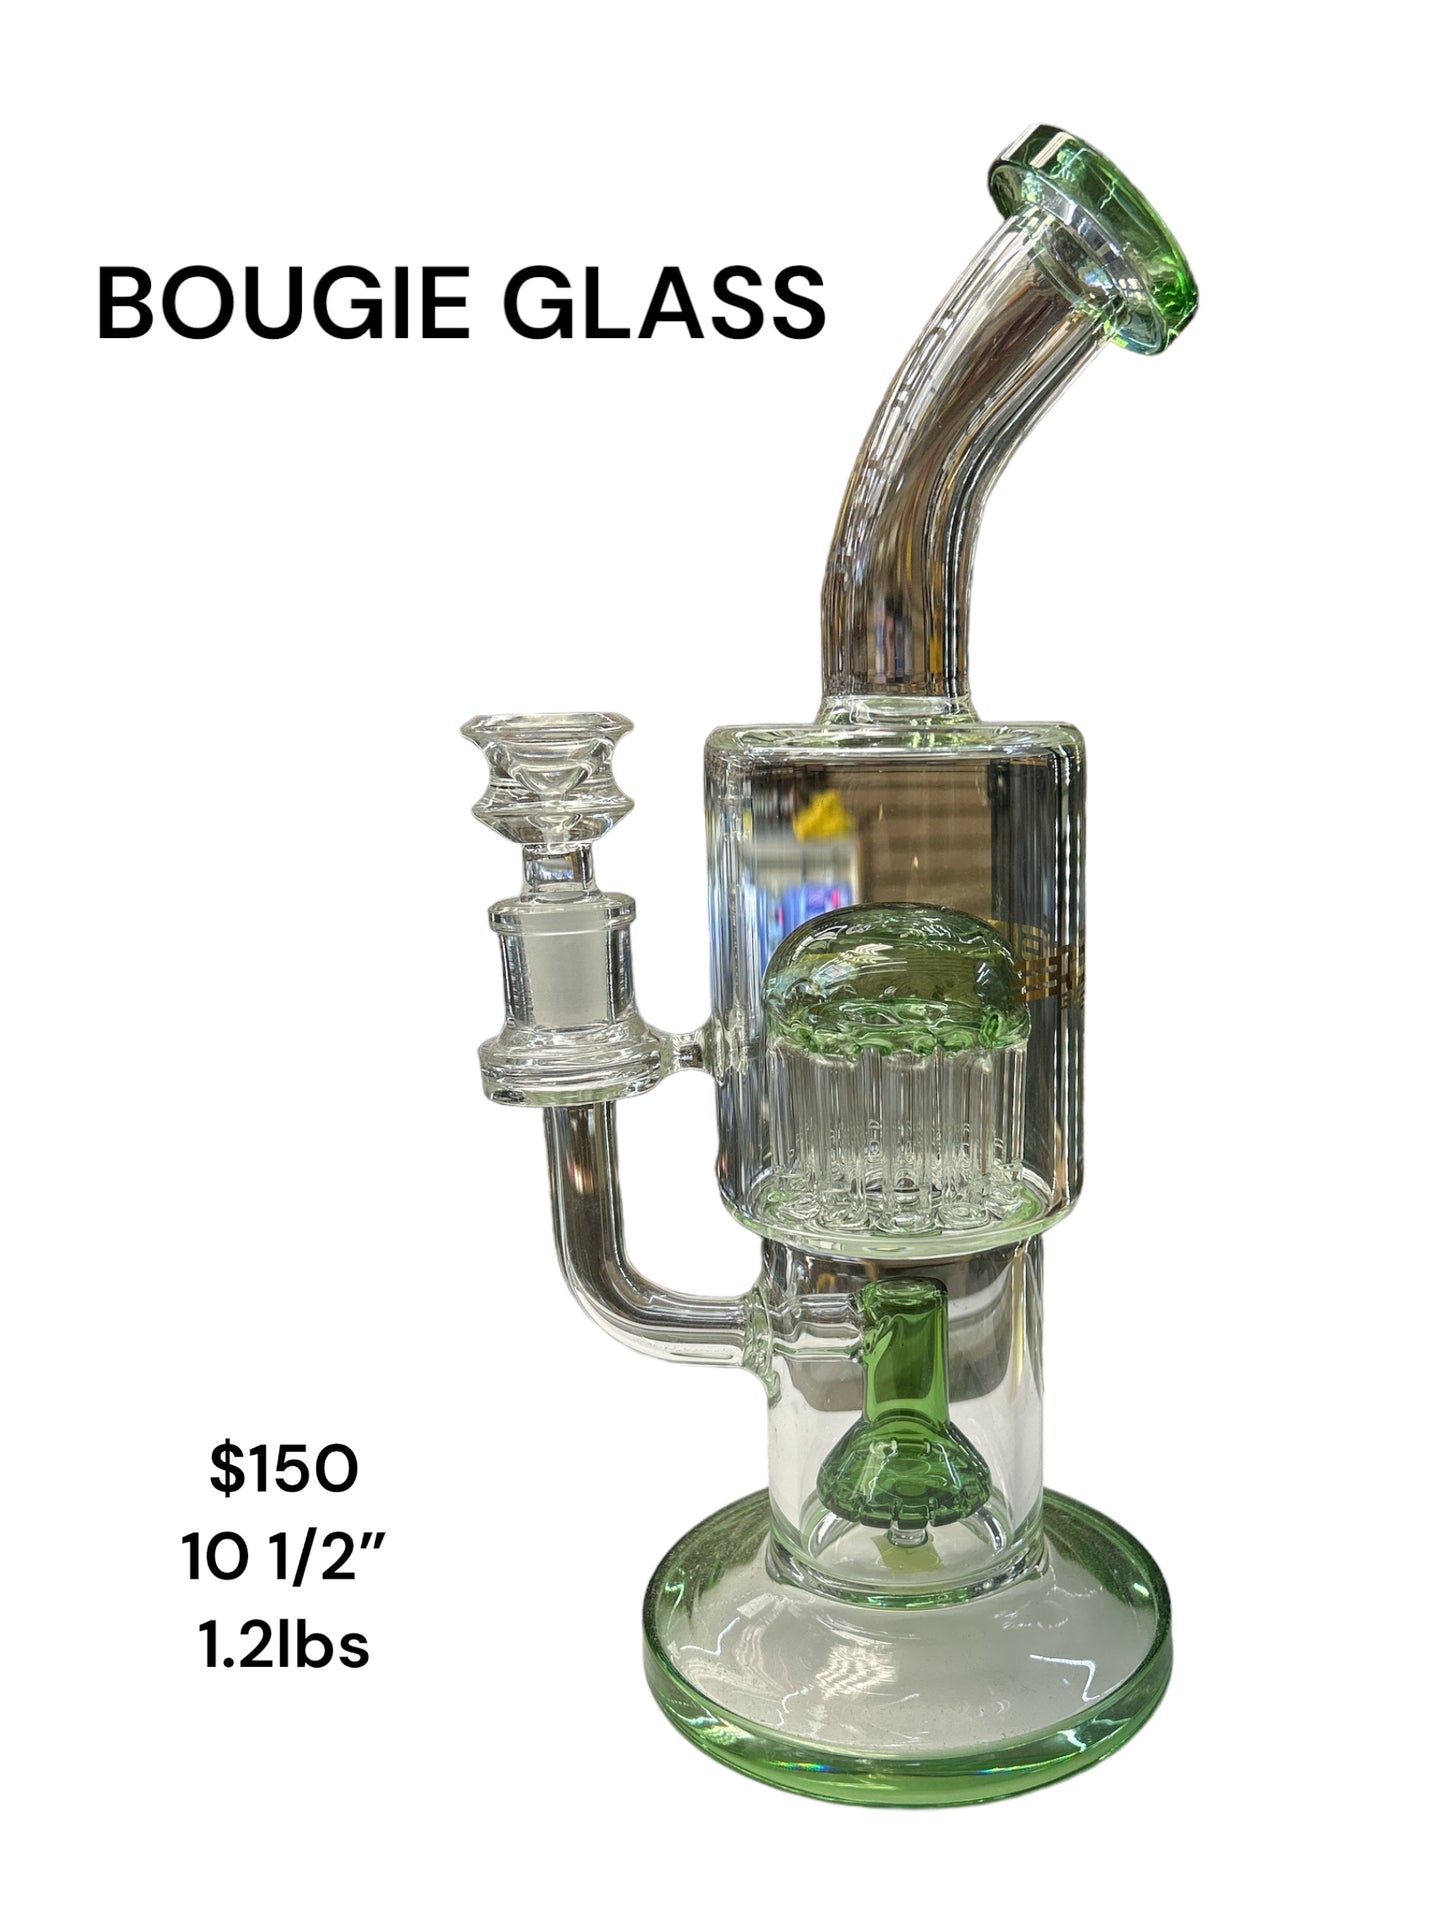 10 1/2” Green BOUGIE GLASS water pipe